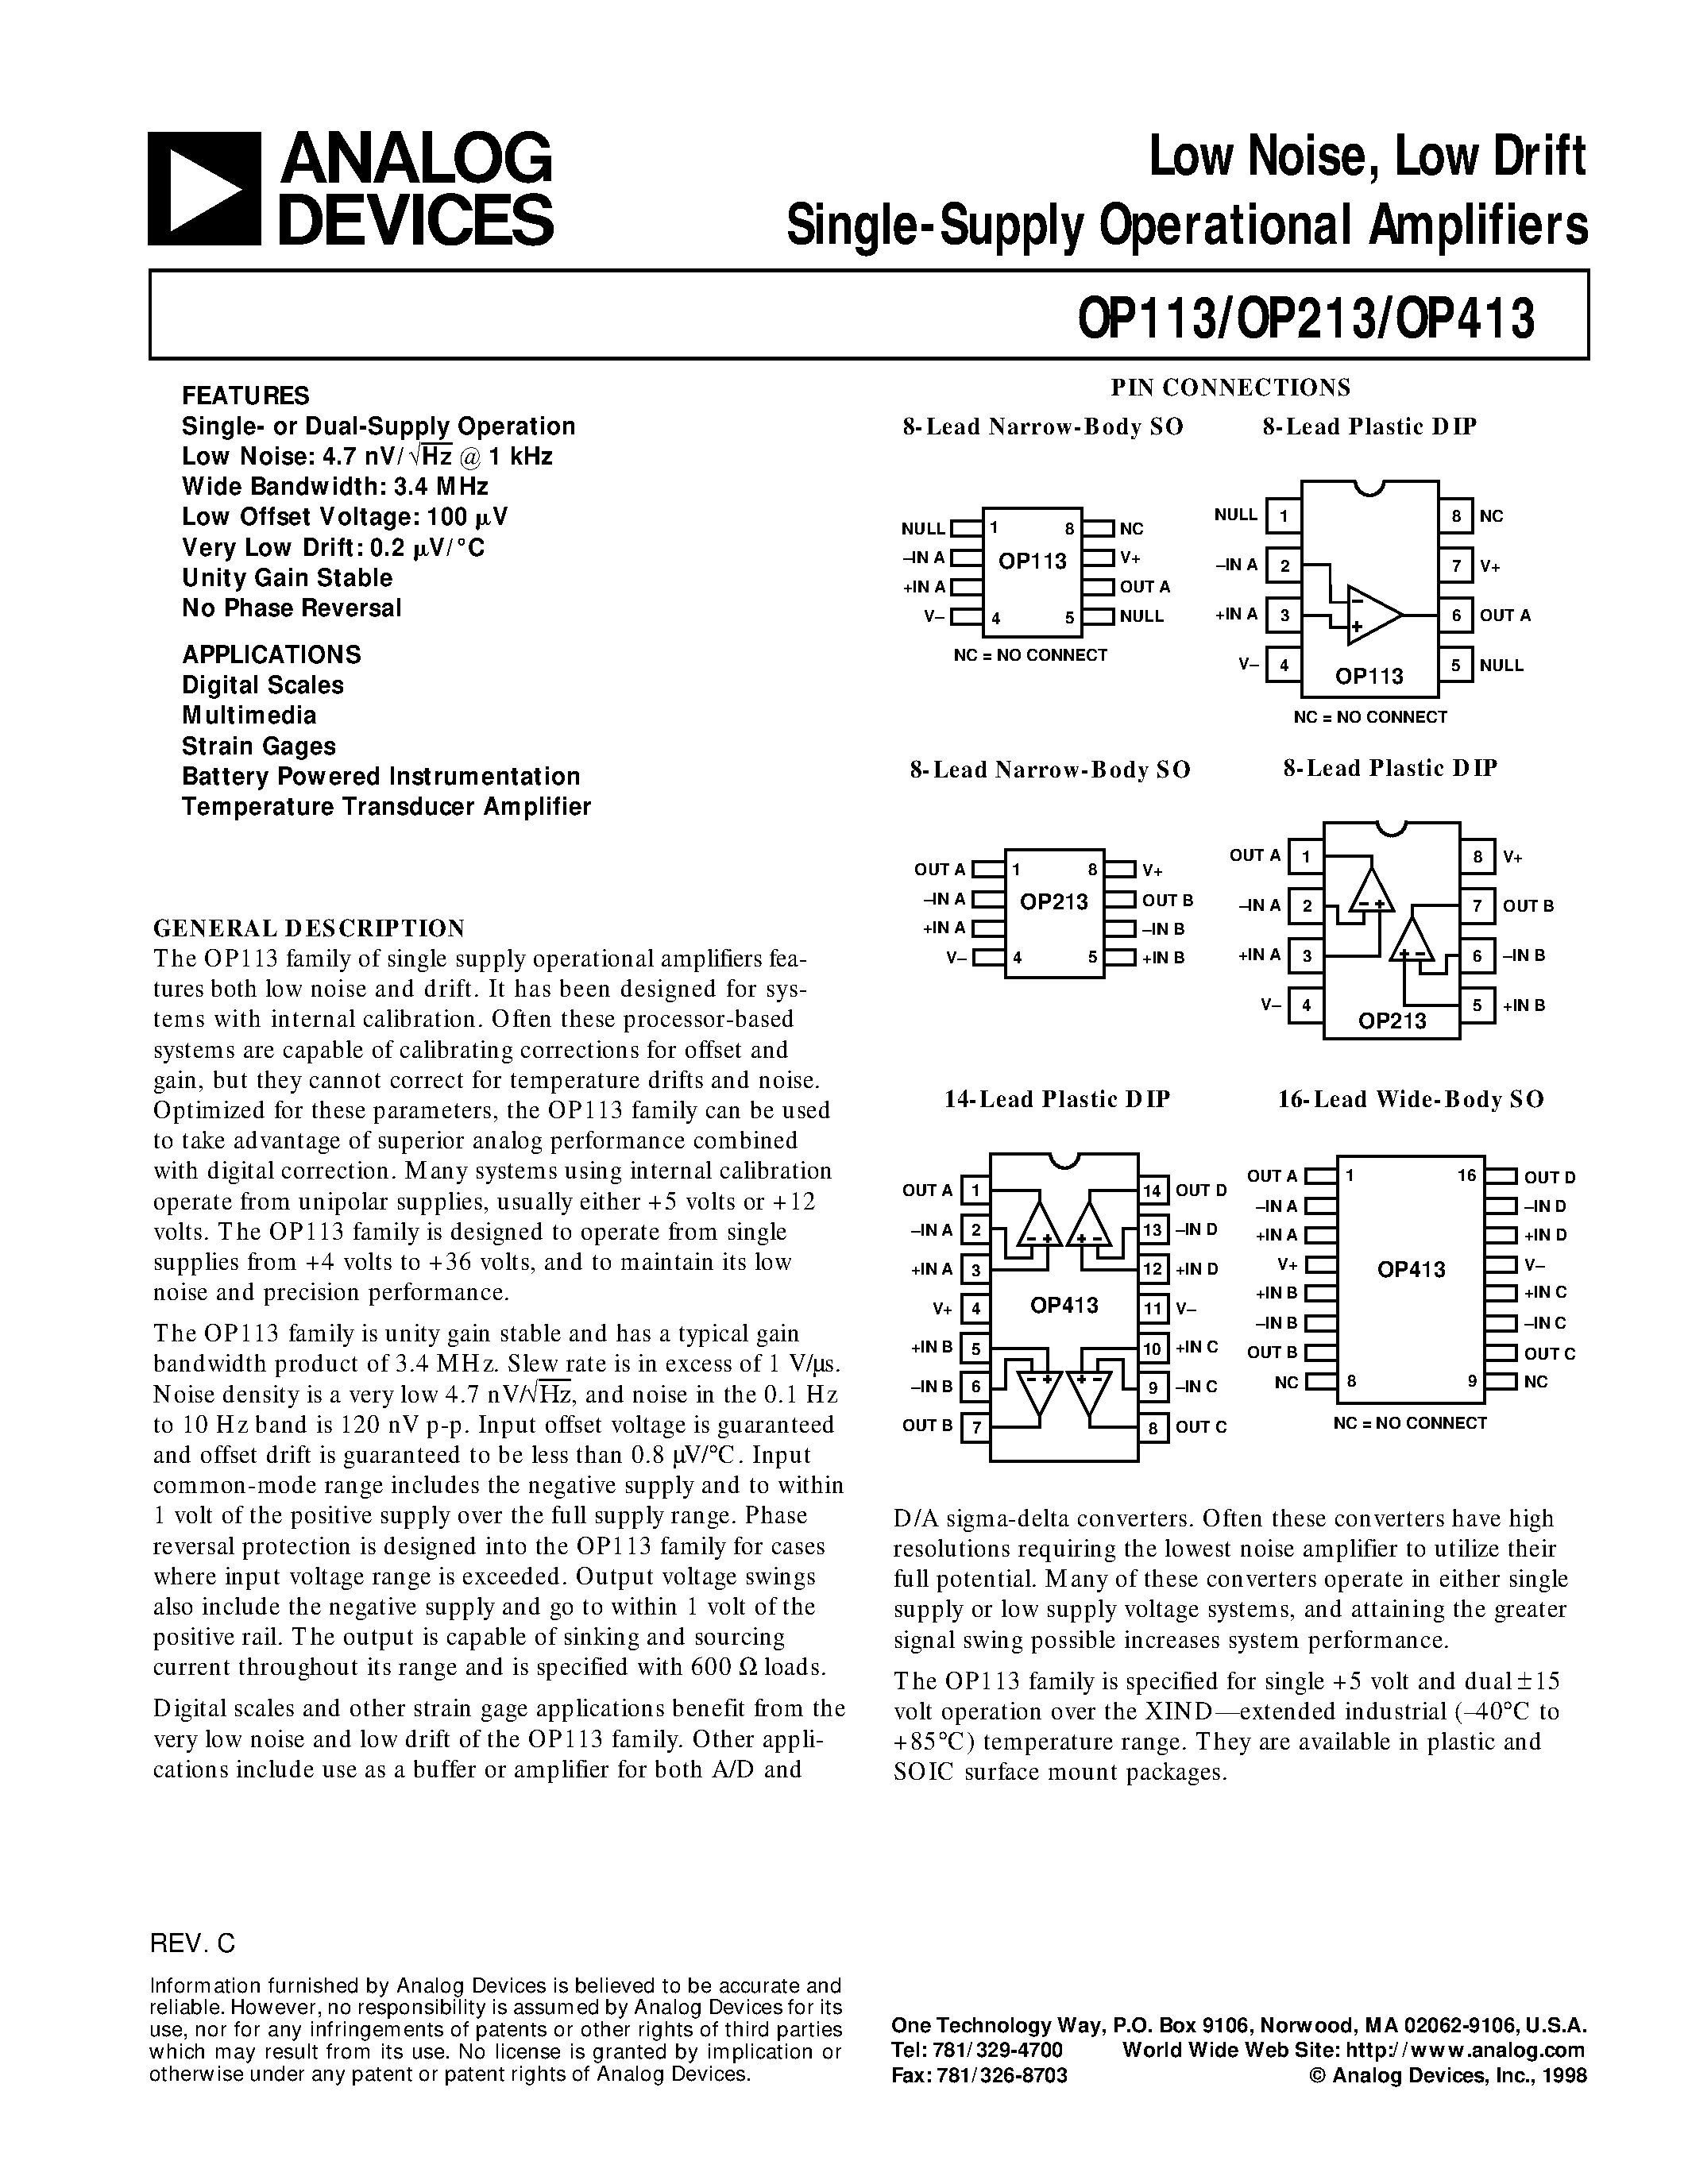 Даташит OP113 - Low Noise / Low Drift Single-Supply Operational Amplifiers страница 1